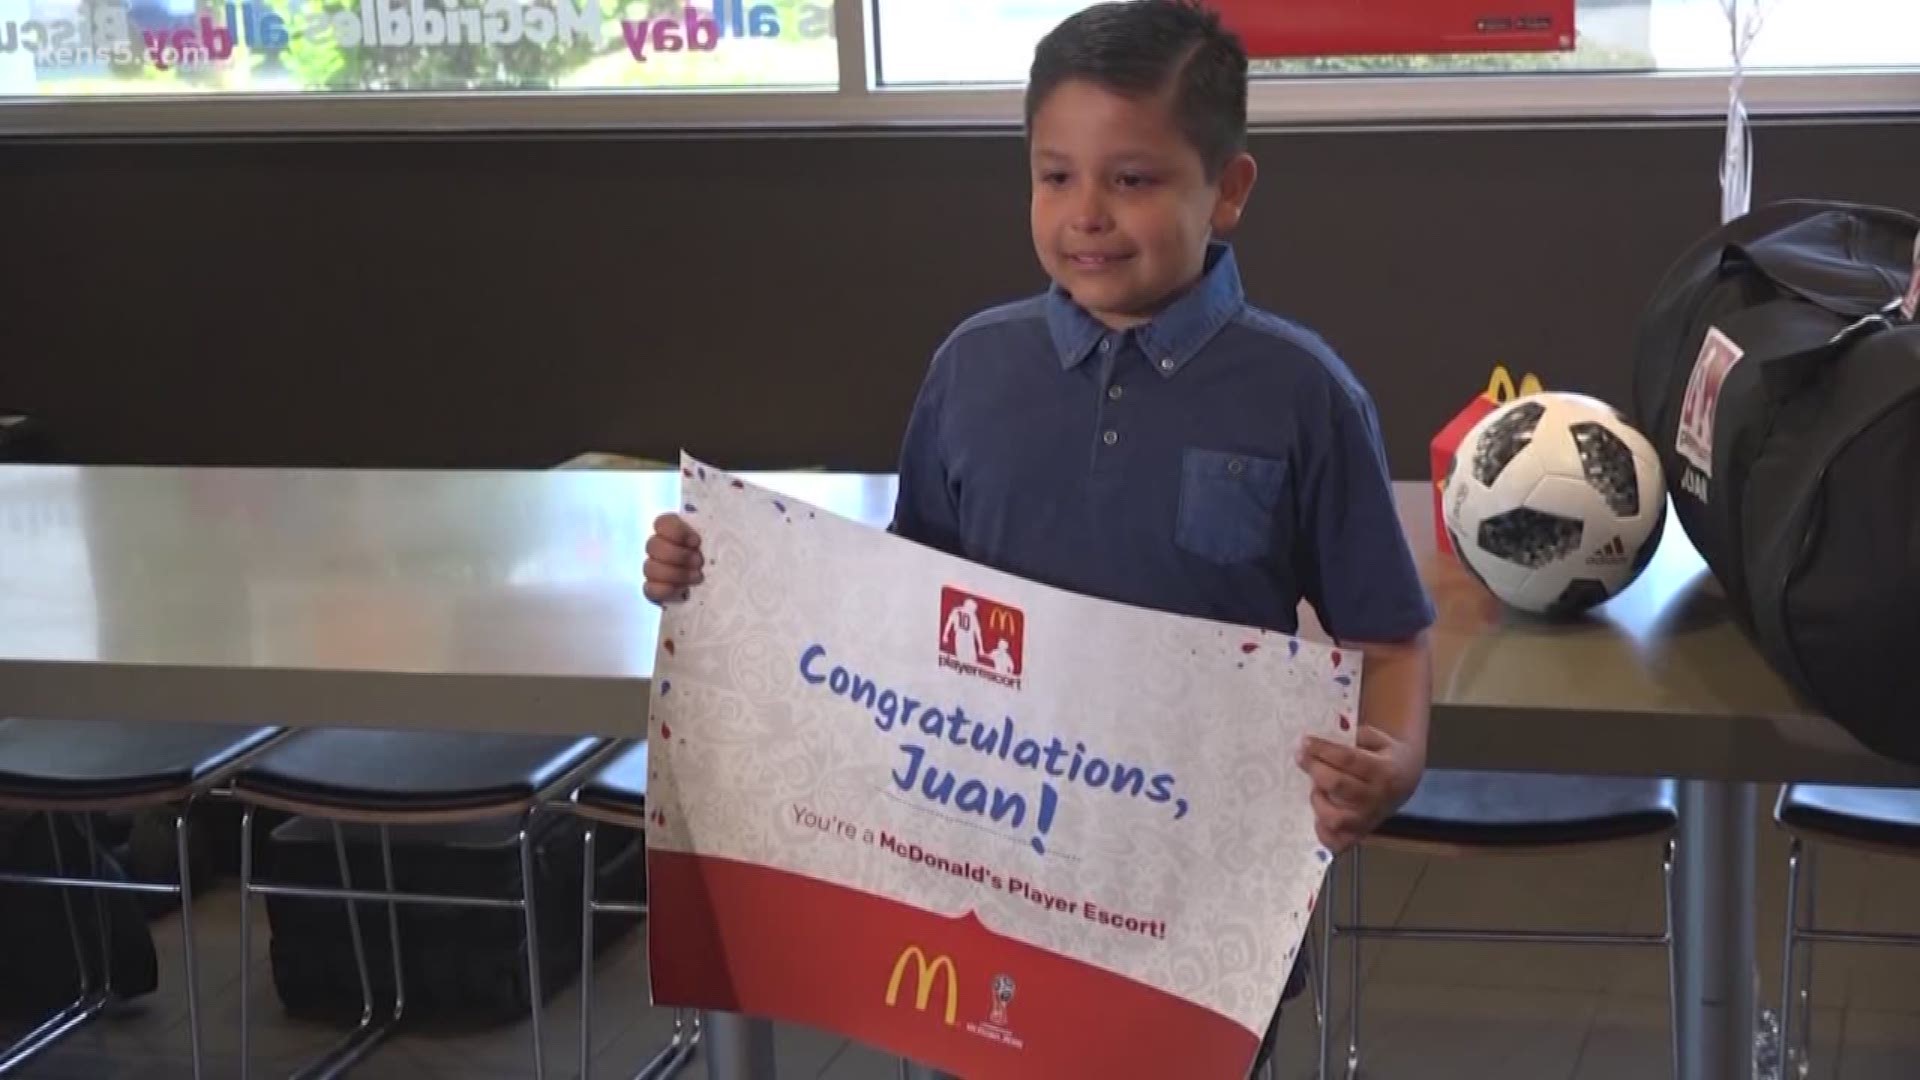 San Antonio will be represented at this year's World Cup, thanks to a second-grader that won a contest to be on the field before Mexico plays Germany.